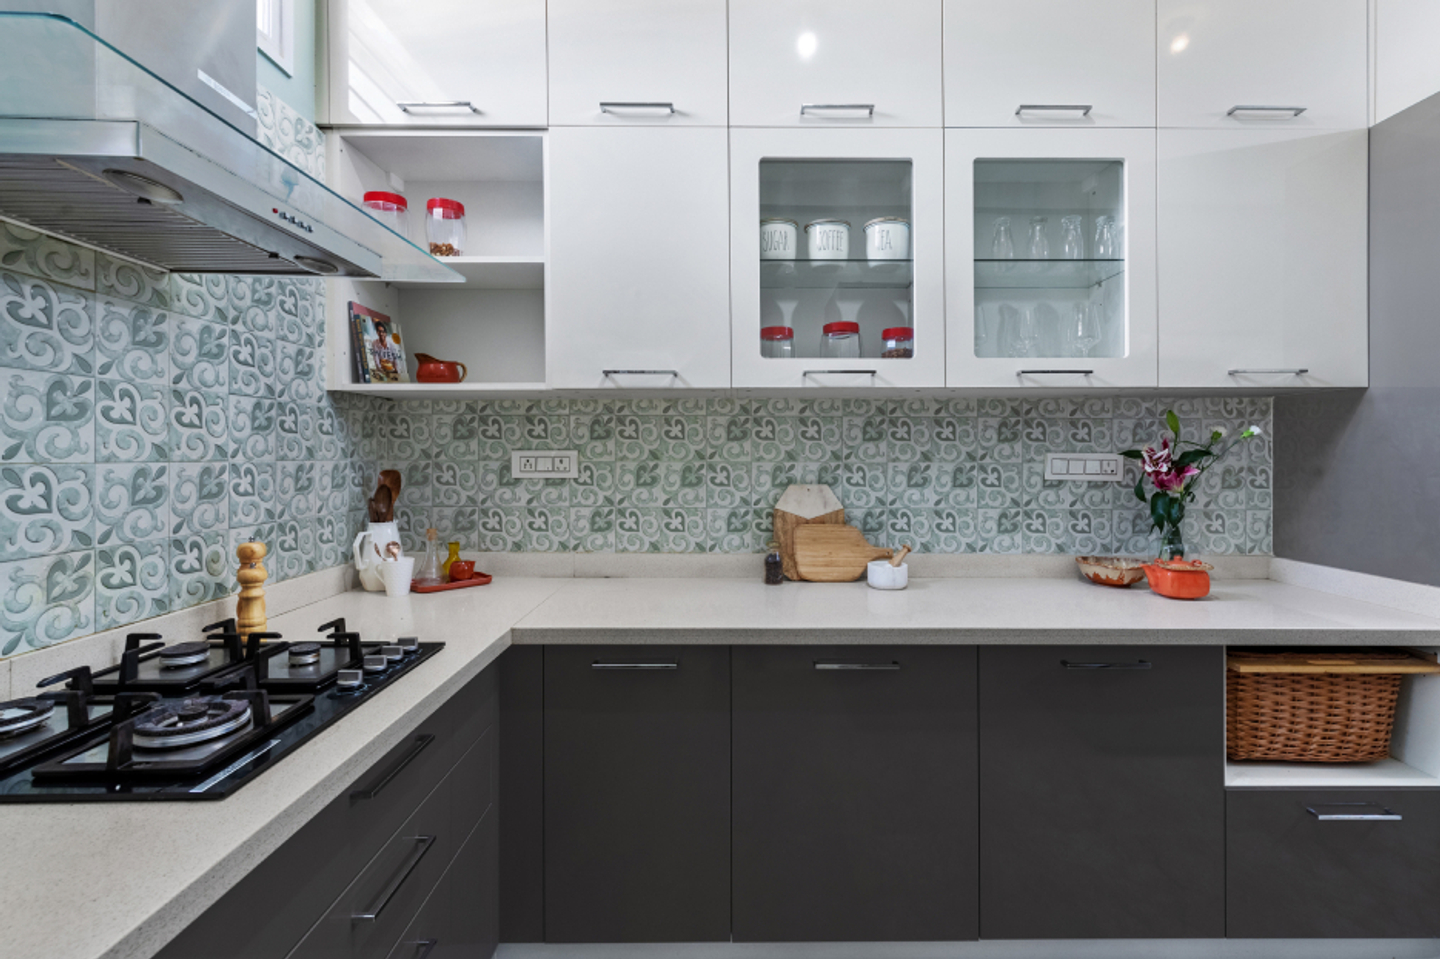 Modern L-Shaped Kitchen Design With A Corian Countertop